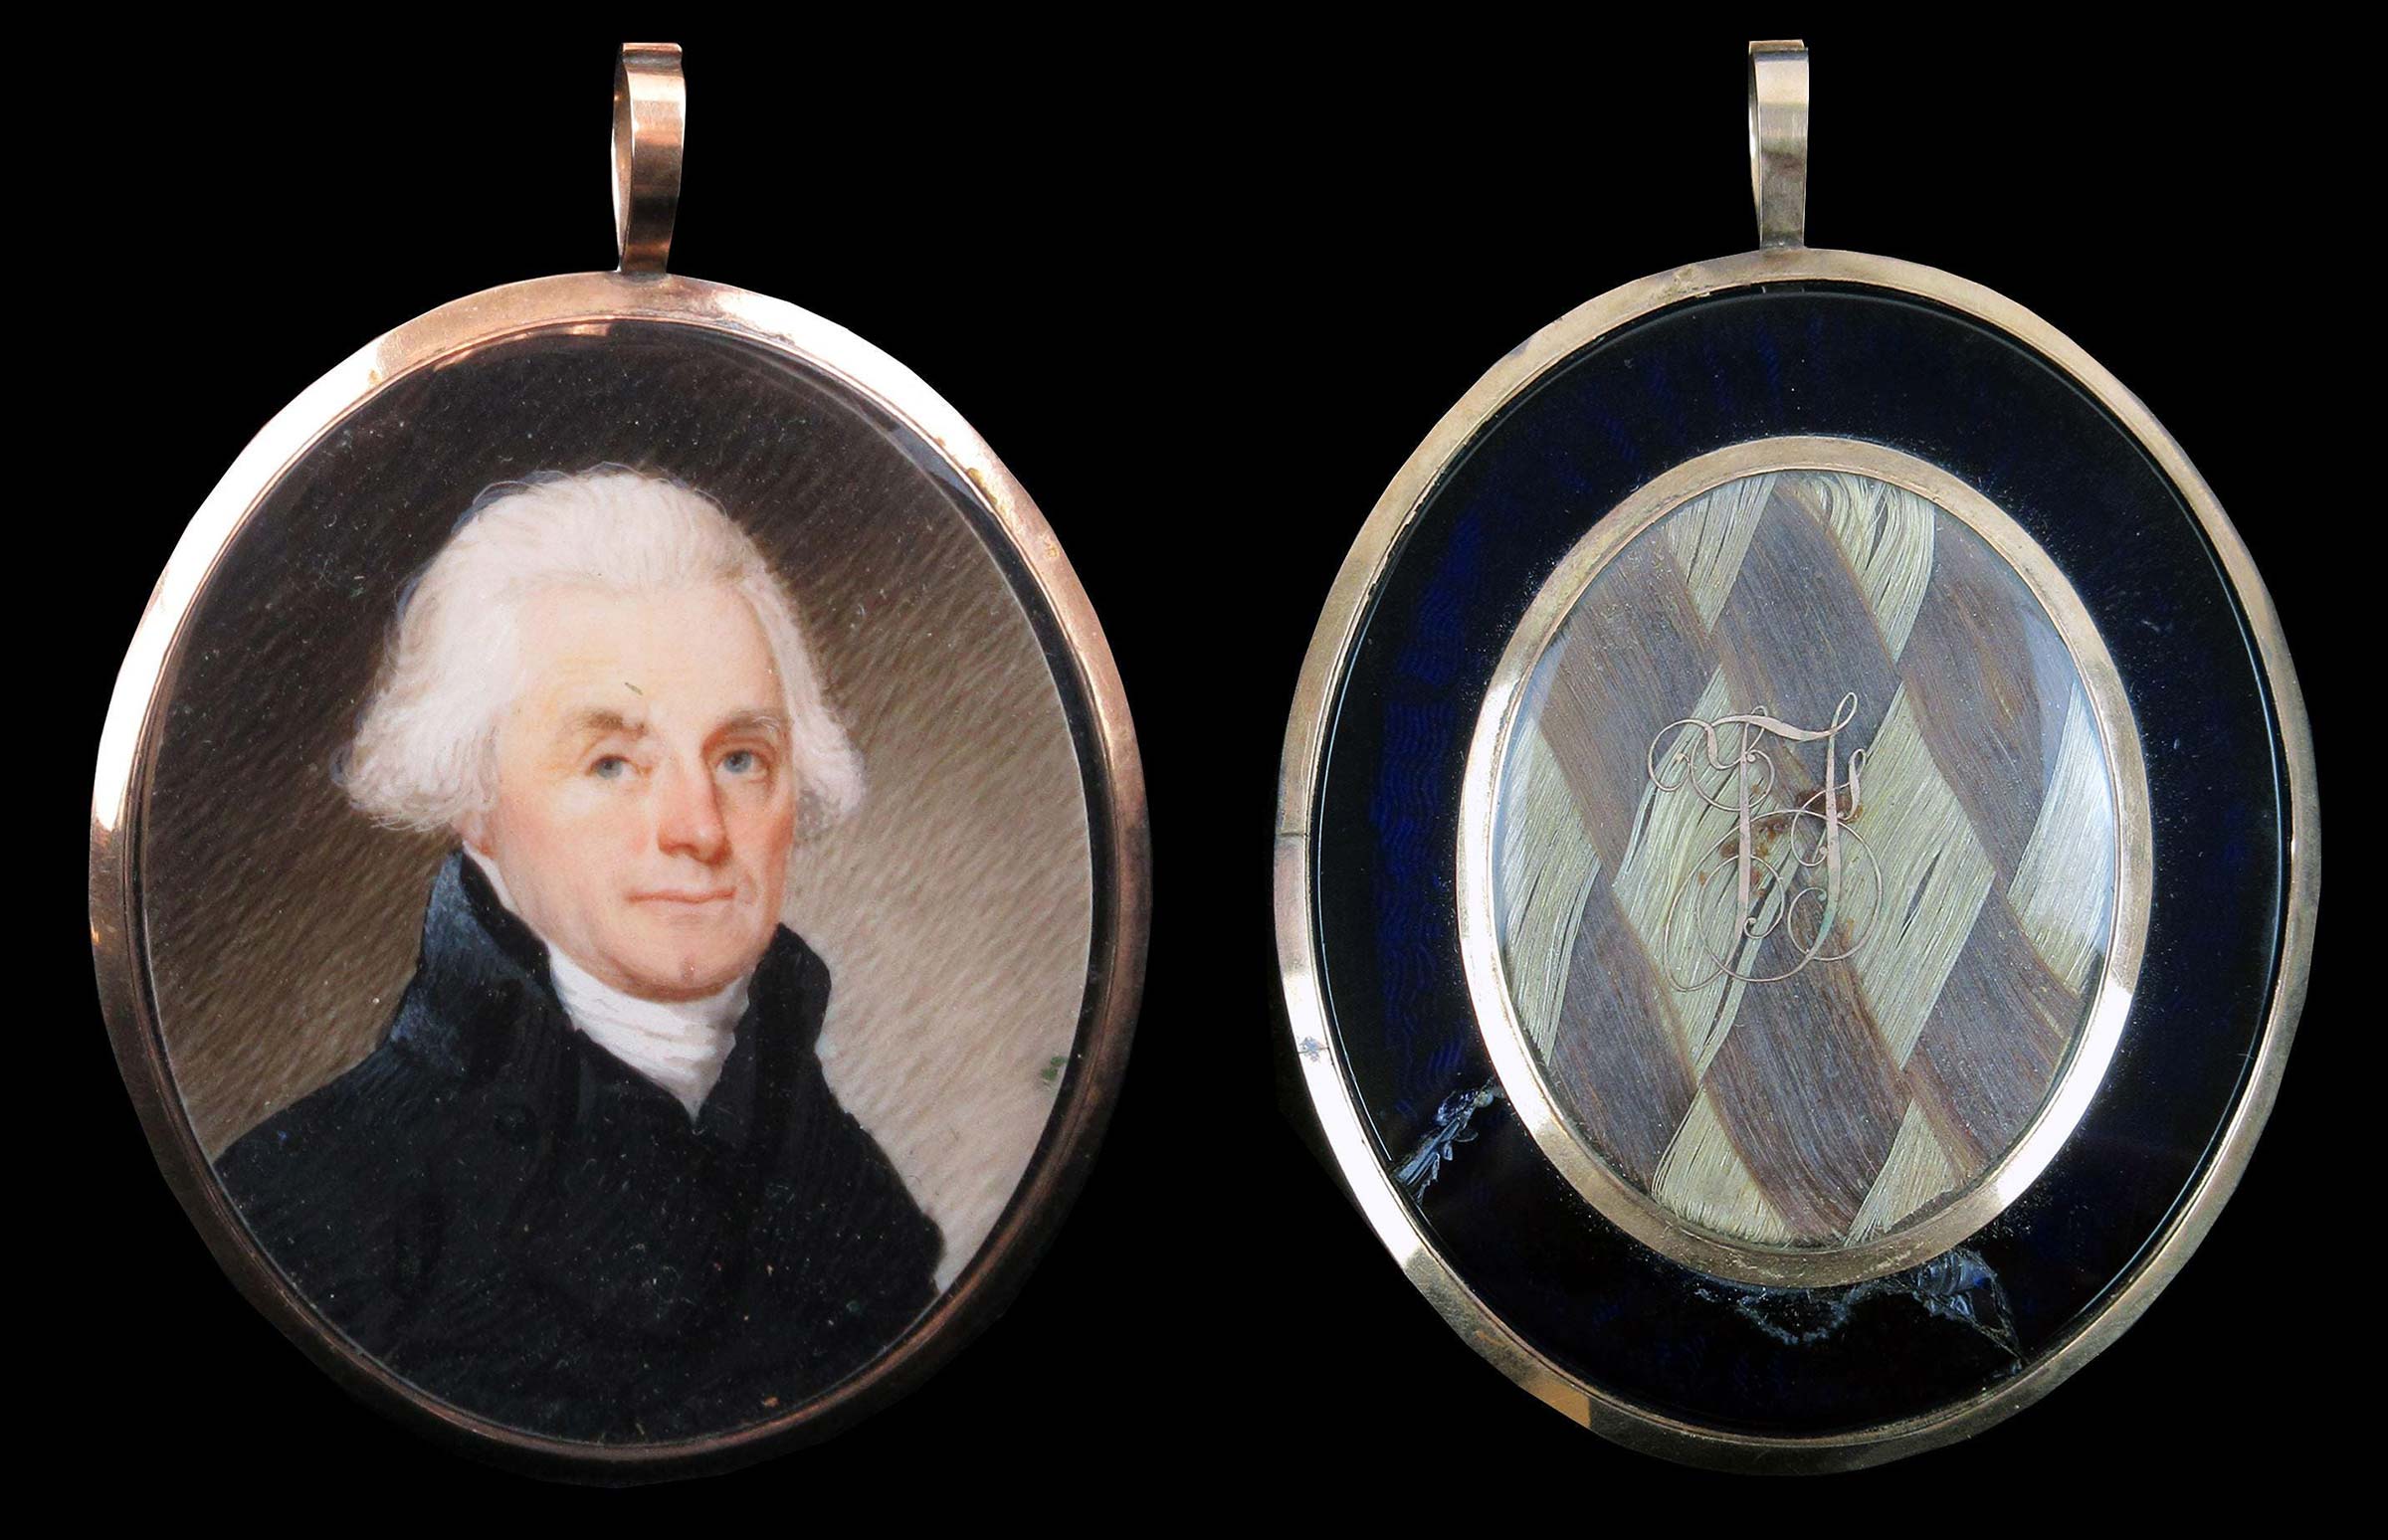 Exquisite portrait miniature of Thomas Jefferson attributed to the British miniaturist Robert Field (1769-1819), along with two locks of hair (one of them Jefferson’s) ($60,000-$500,000).